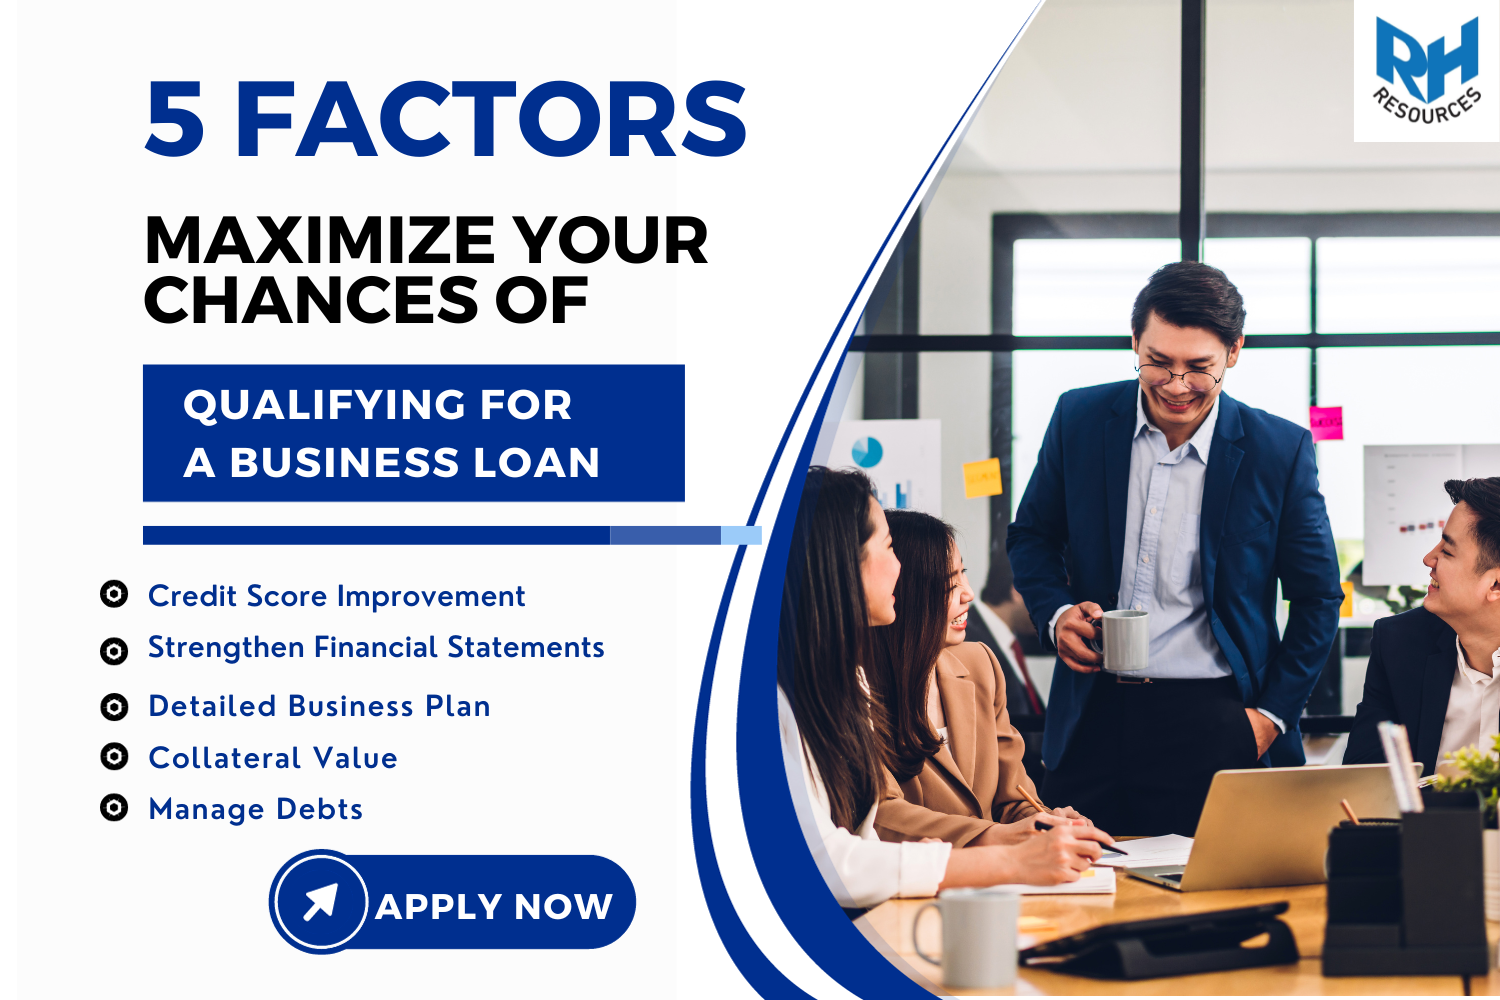 5 Factors to Maximize Your Chances of Qualifying for a Business Loan